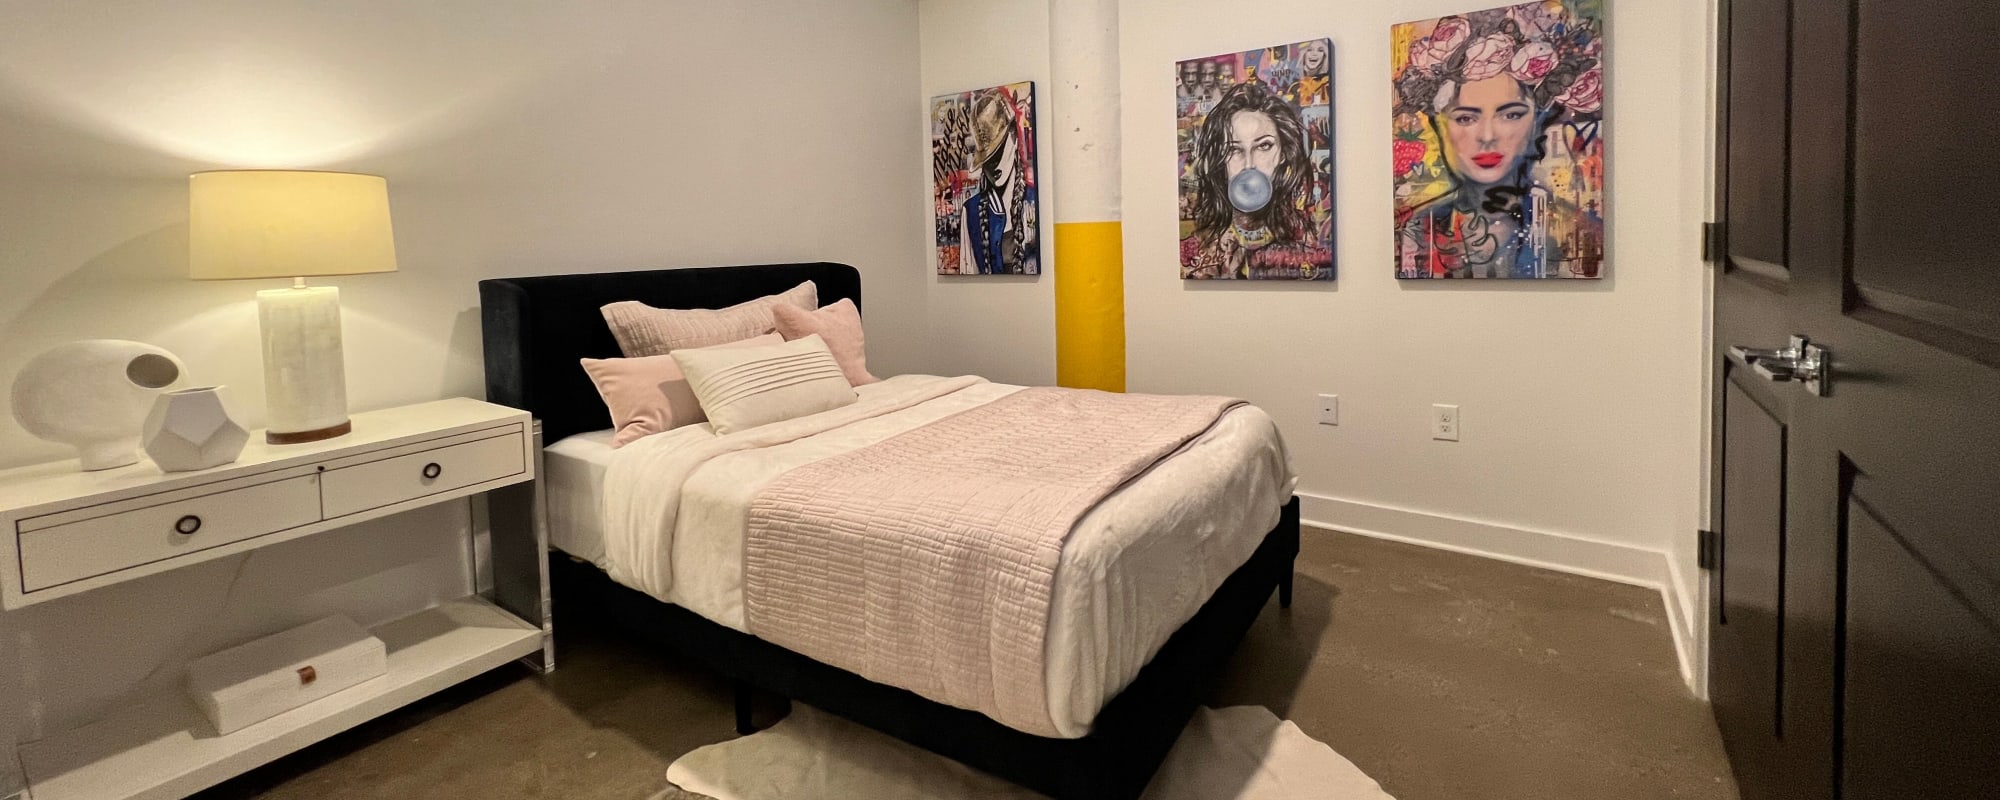 Spacious Bedroom at Factory 52 Apartments | Apartments in Norwood, OH